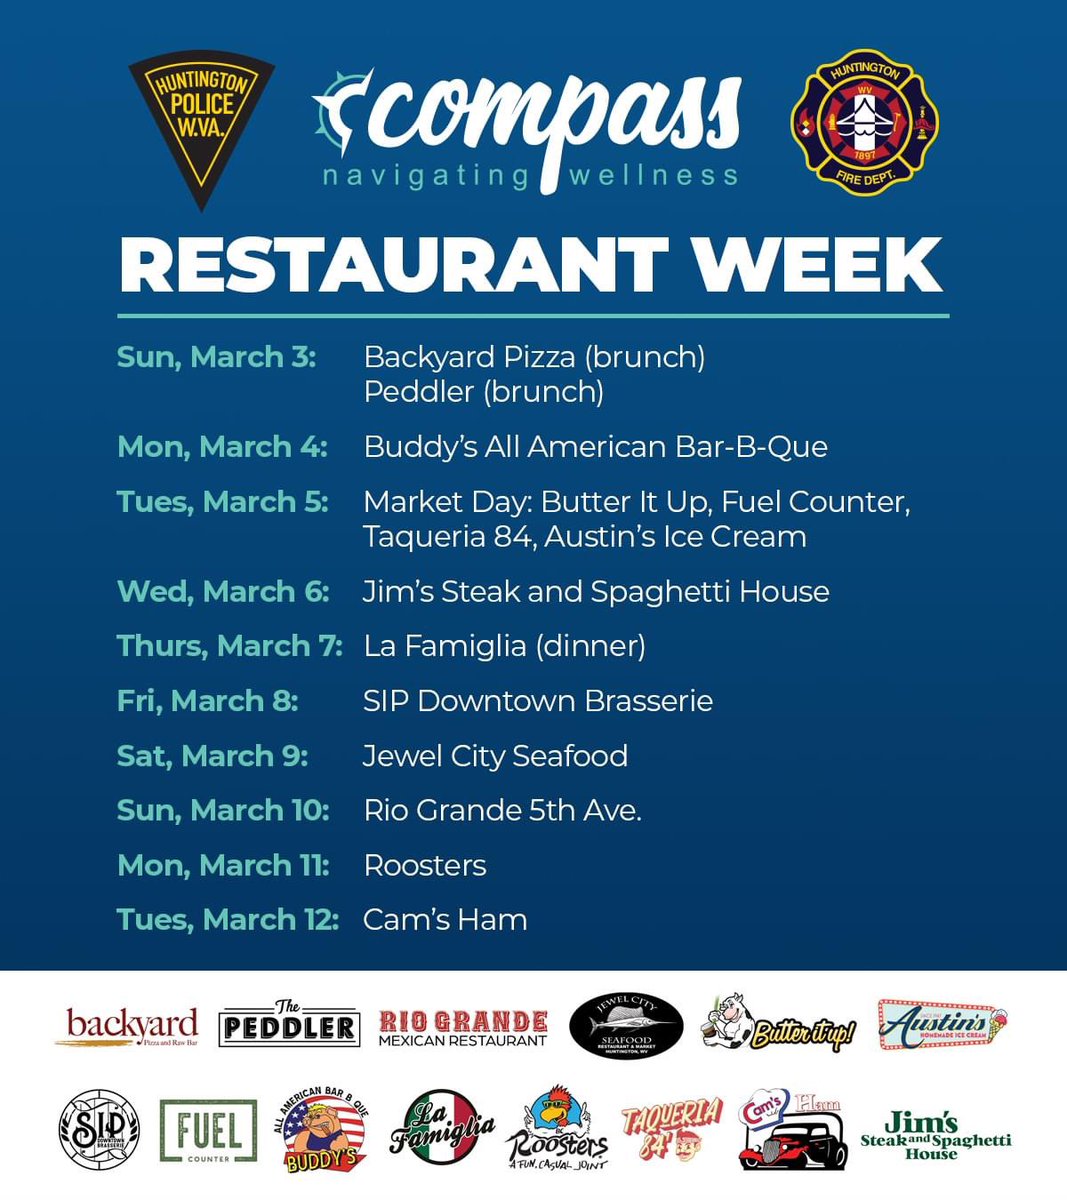 Compass Restaurant Week begins Sunday! Visit these restaurants on the listed days and support our Huntington Police & Fire.